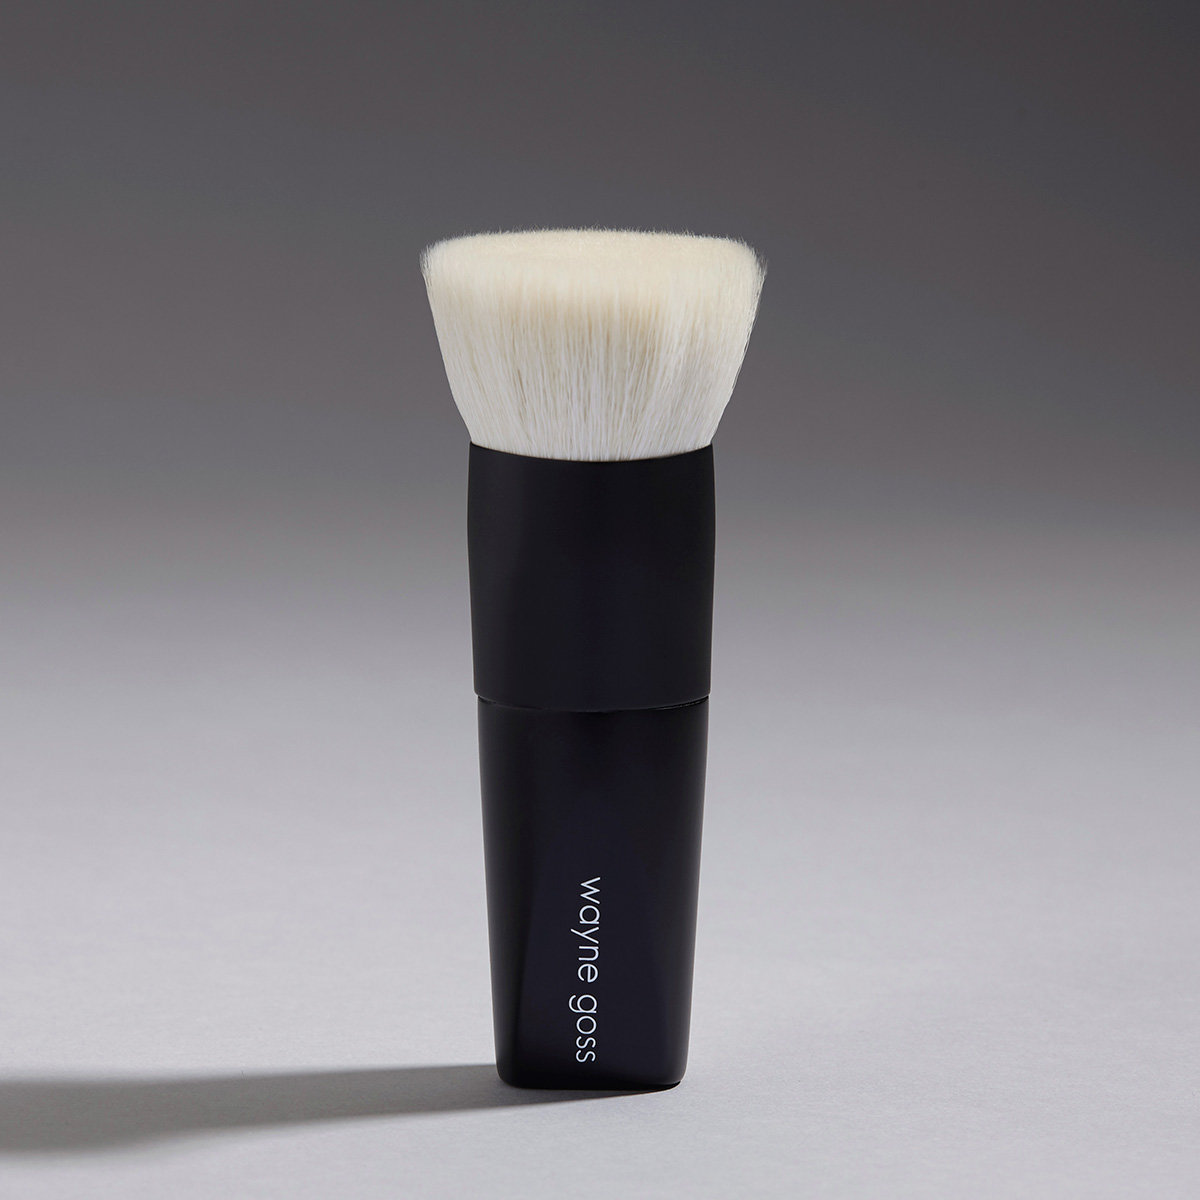 Alternate product image for Holiday Brush shown with the description.